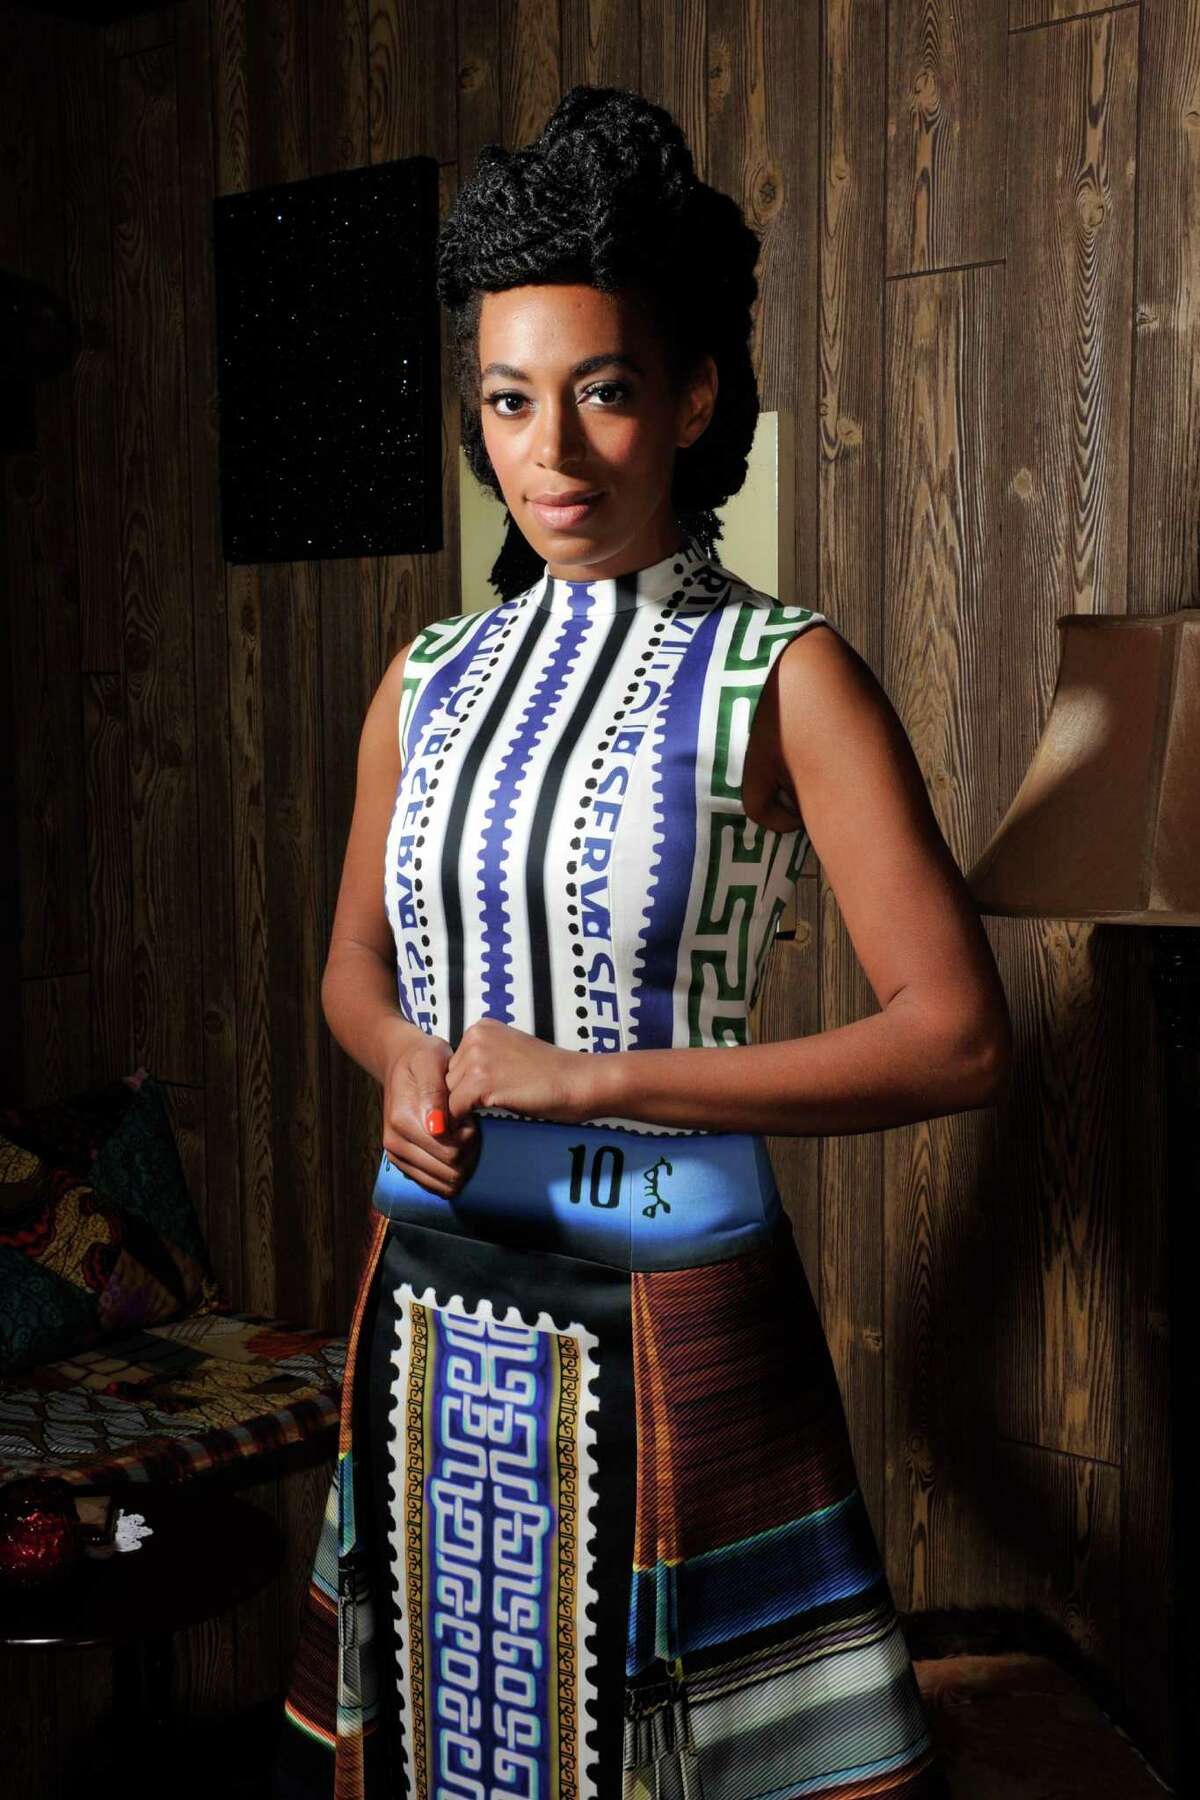 BASEL, SWITZERLAND - JUNE 12: Solange Knowles wearing Mary Katrantzou poses at 'Better Days', an art bar installation by Mickalene Thomas presented by Absolut Art Bureau at Art Basel on June 12, 2013 in Basel, Switzerland. (Photo by The Image Gate/Getty Images)